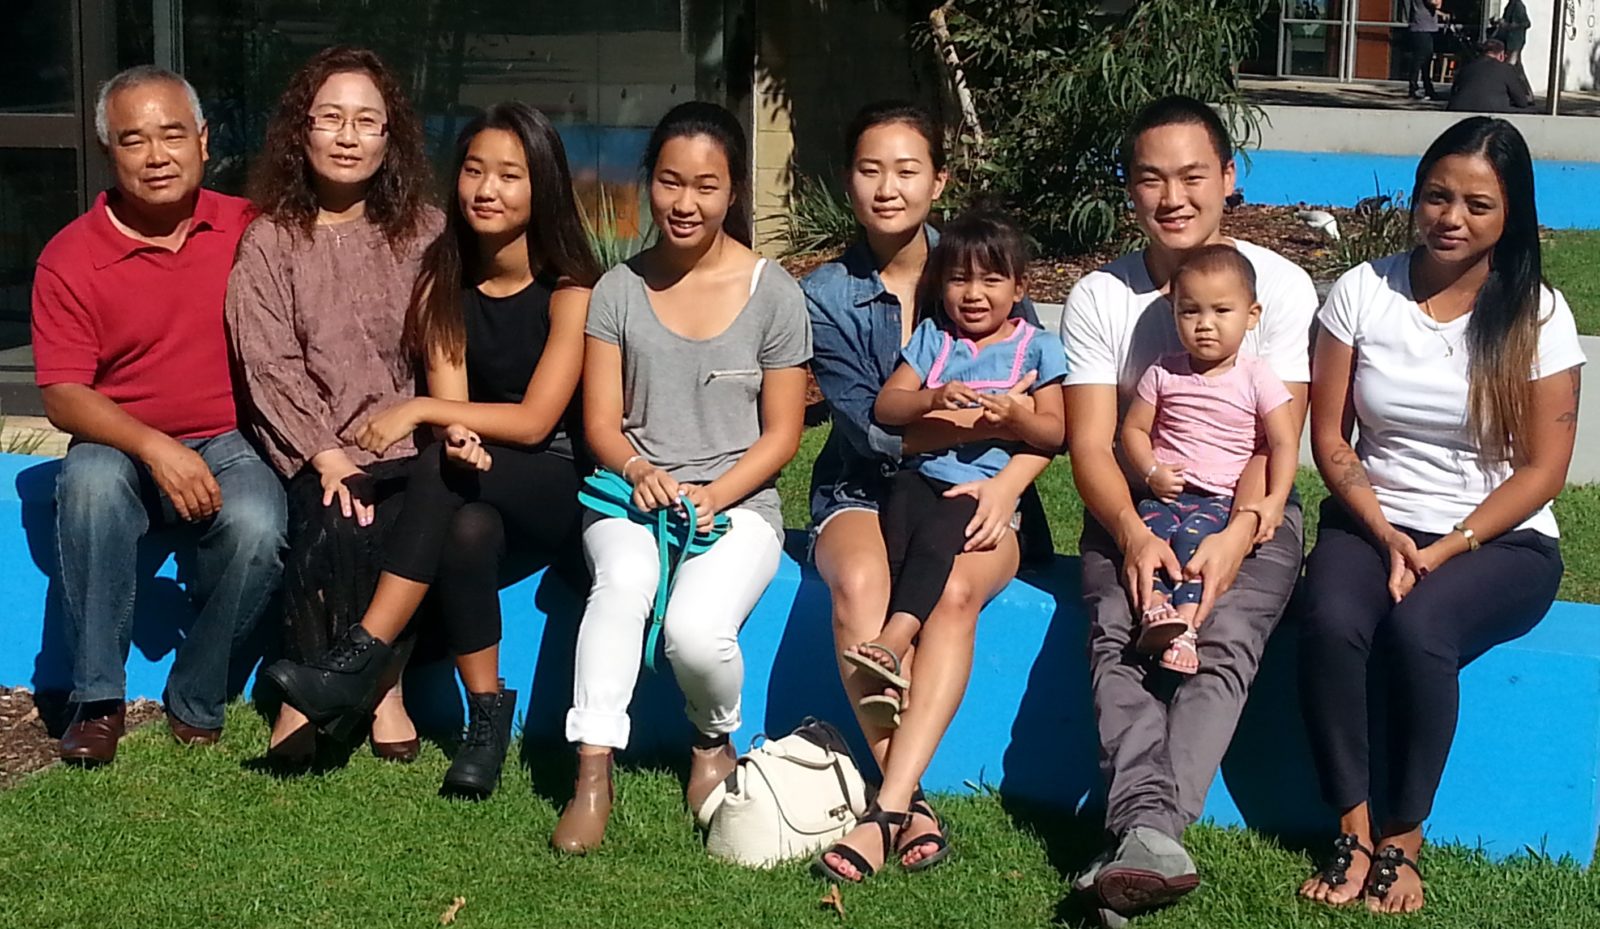 Rev. Jong-il (first from left) and his family.